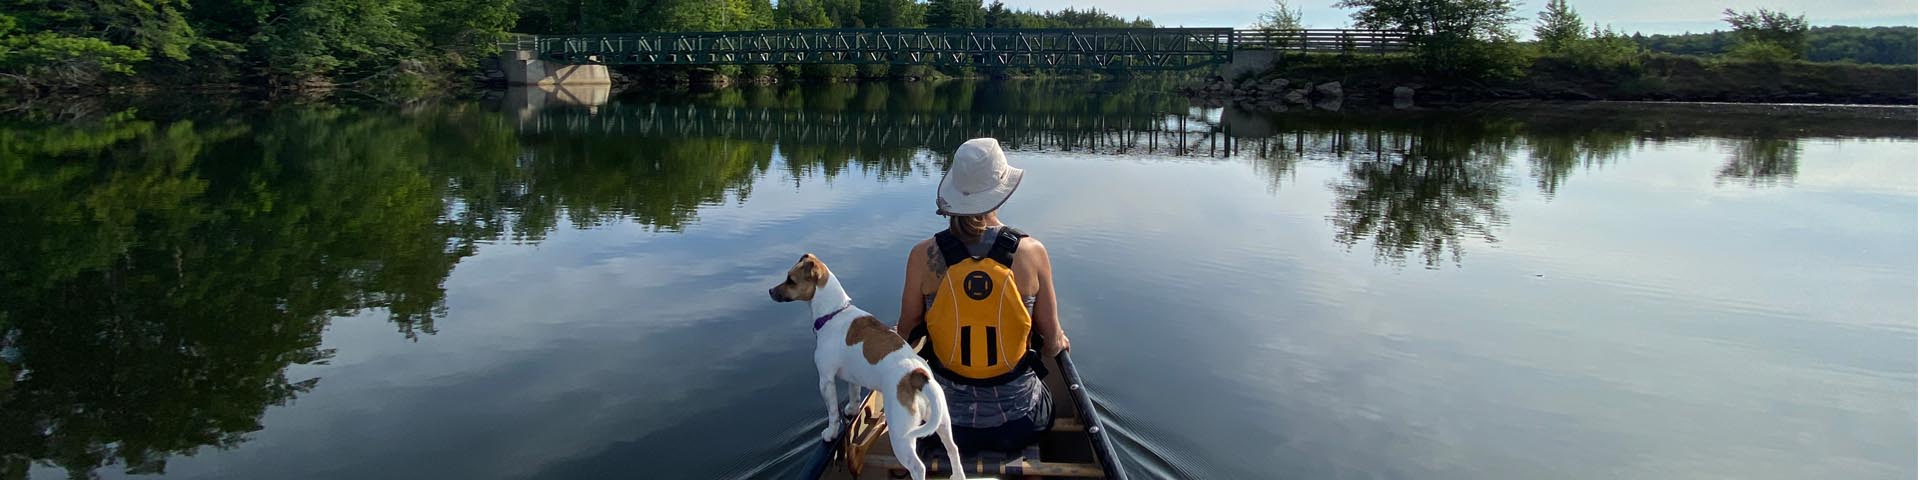 A woman and a dog canoeing on a river. Their backs are facing the camera. Trees surround them and in front of them, there is a footbridge.